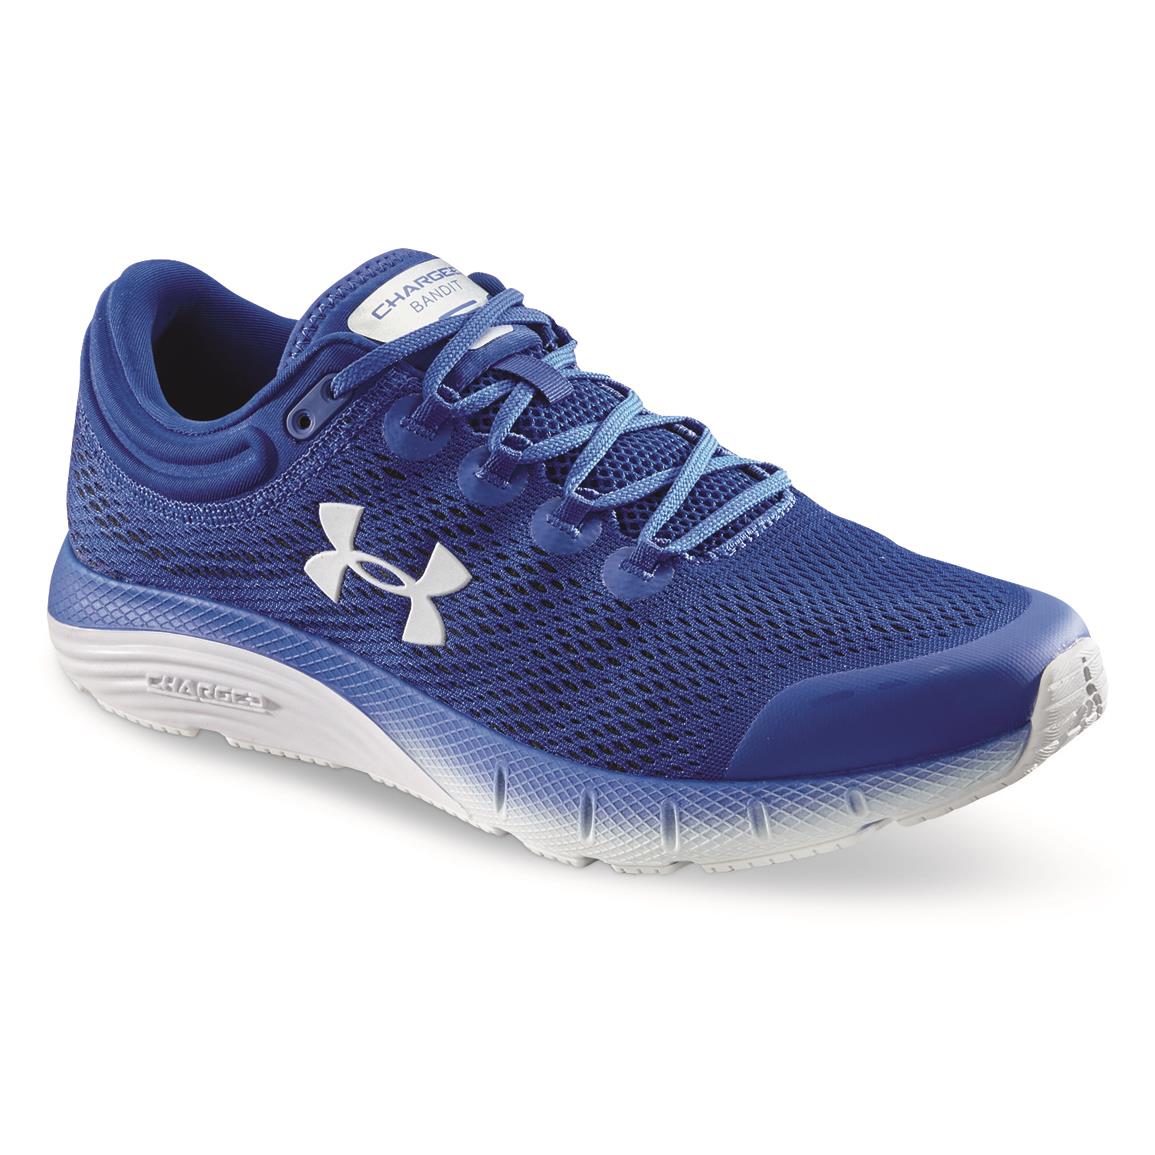 Under Armour Athletic Shoes | Sportsman's Guide